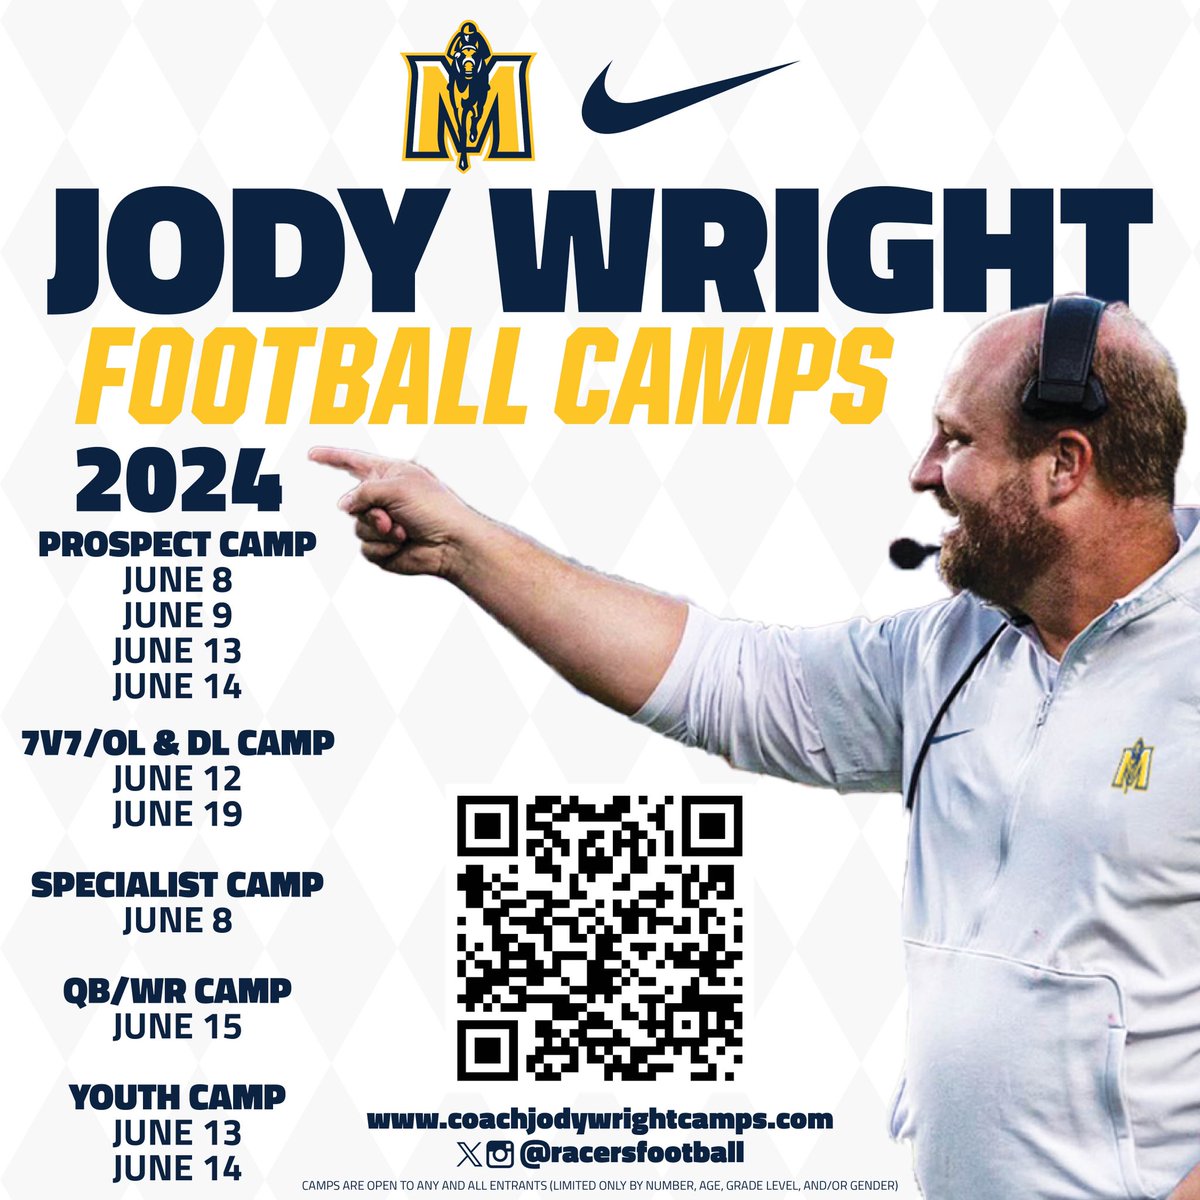 Our staff is Excited to host some future @racersfootball players and families on the beautiful campus of Murray State University @murraystateuniv Going to be a fun summer in Murray, KY coachjodywrightcamps.com @MurrayKentucky #GoRacers 🏇 #FindAWay #Murray #Camps